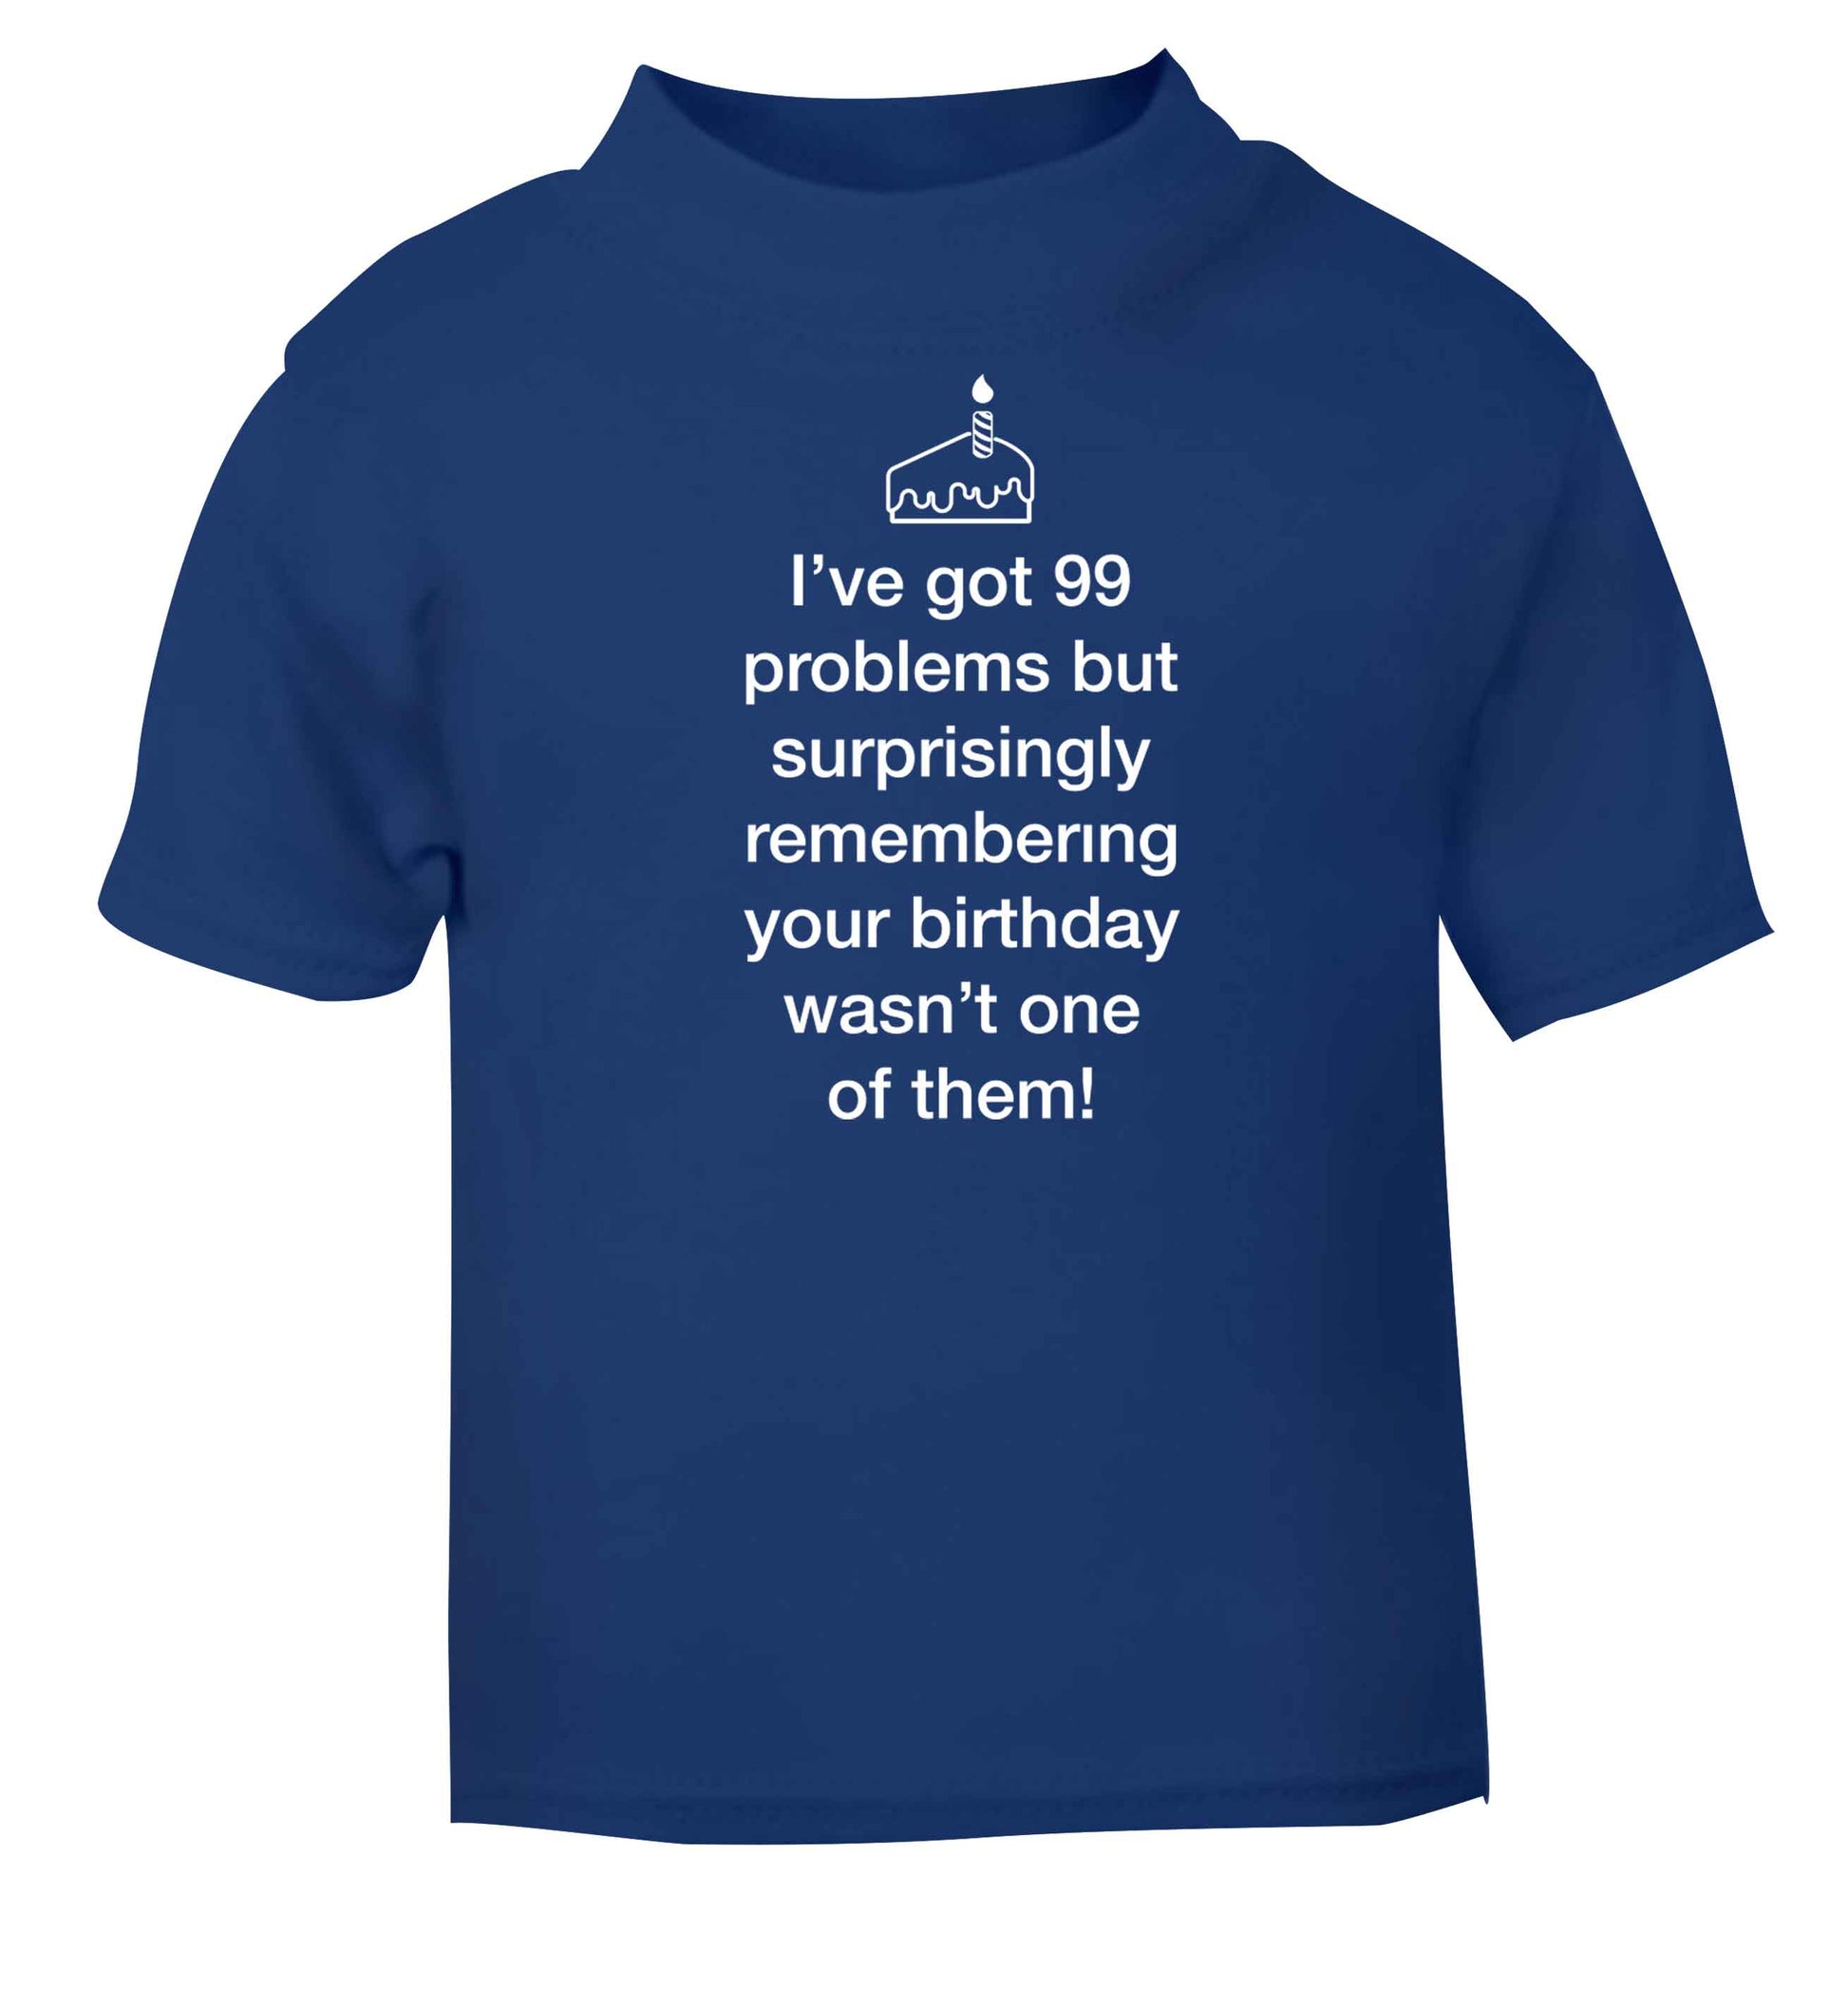 I've got 99 problems but surprisingly remembering your birthday wasn't one of them! blue baby toddler Tshirt 2 Years